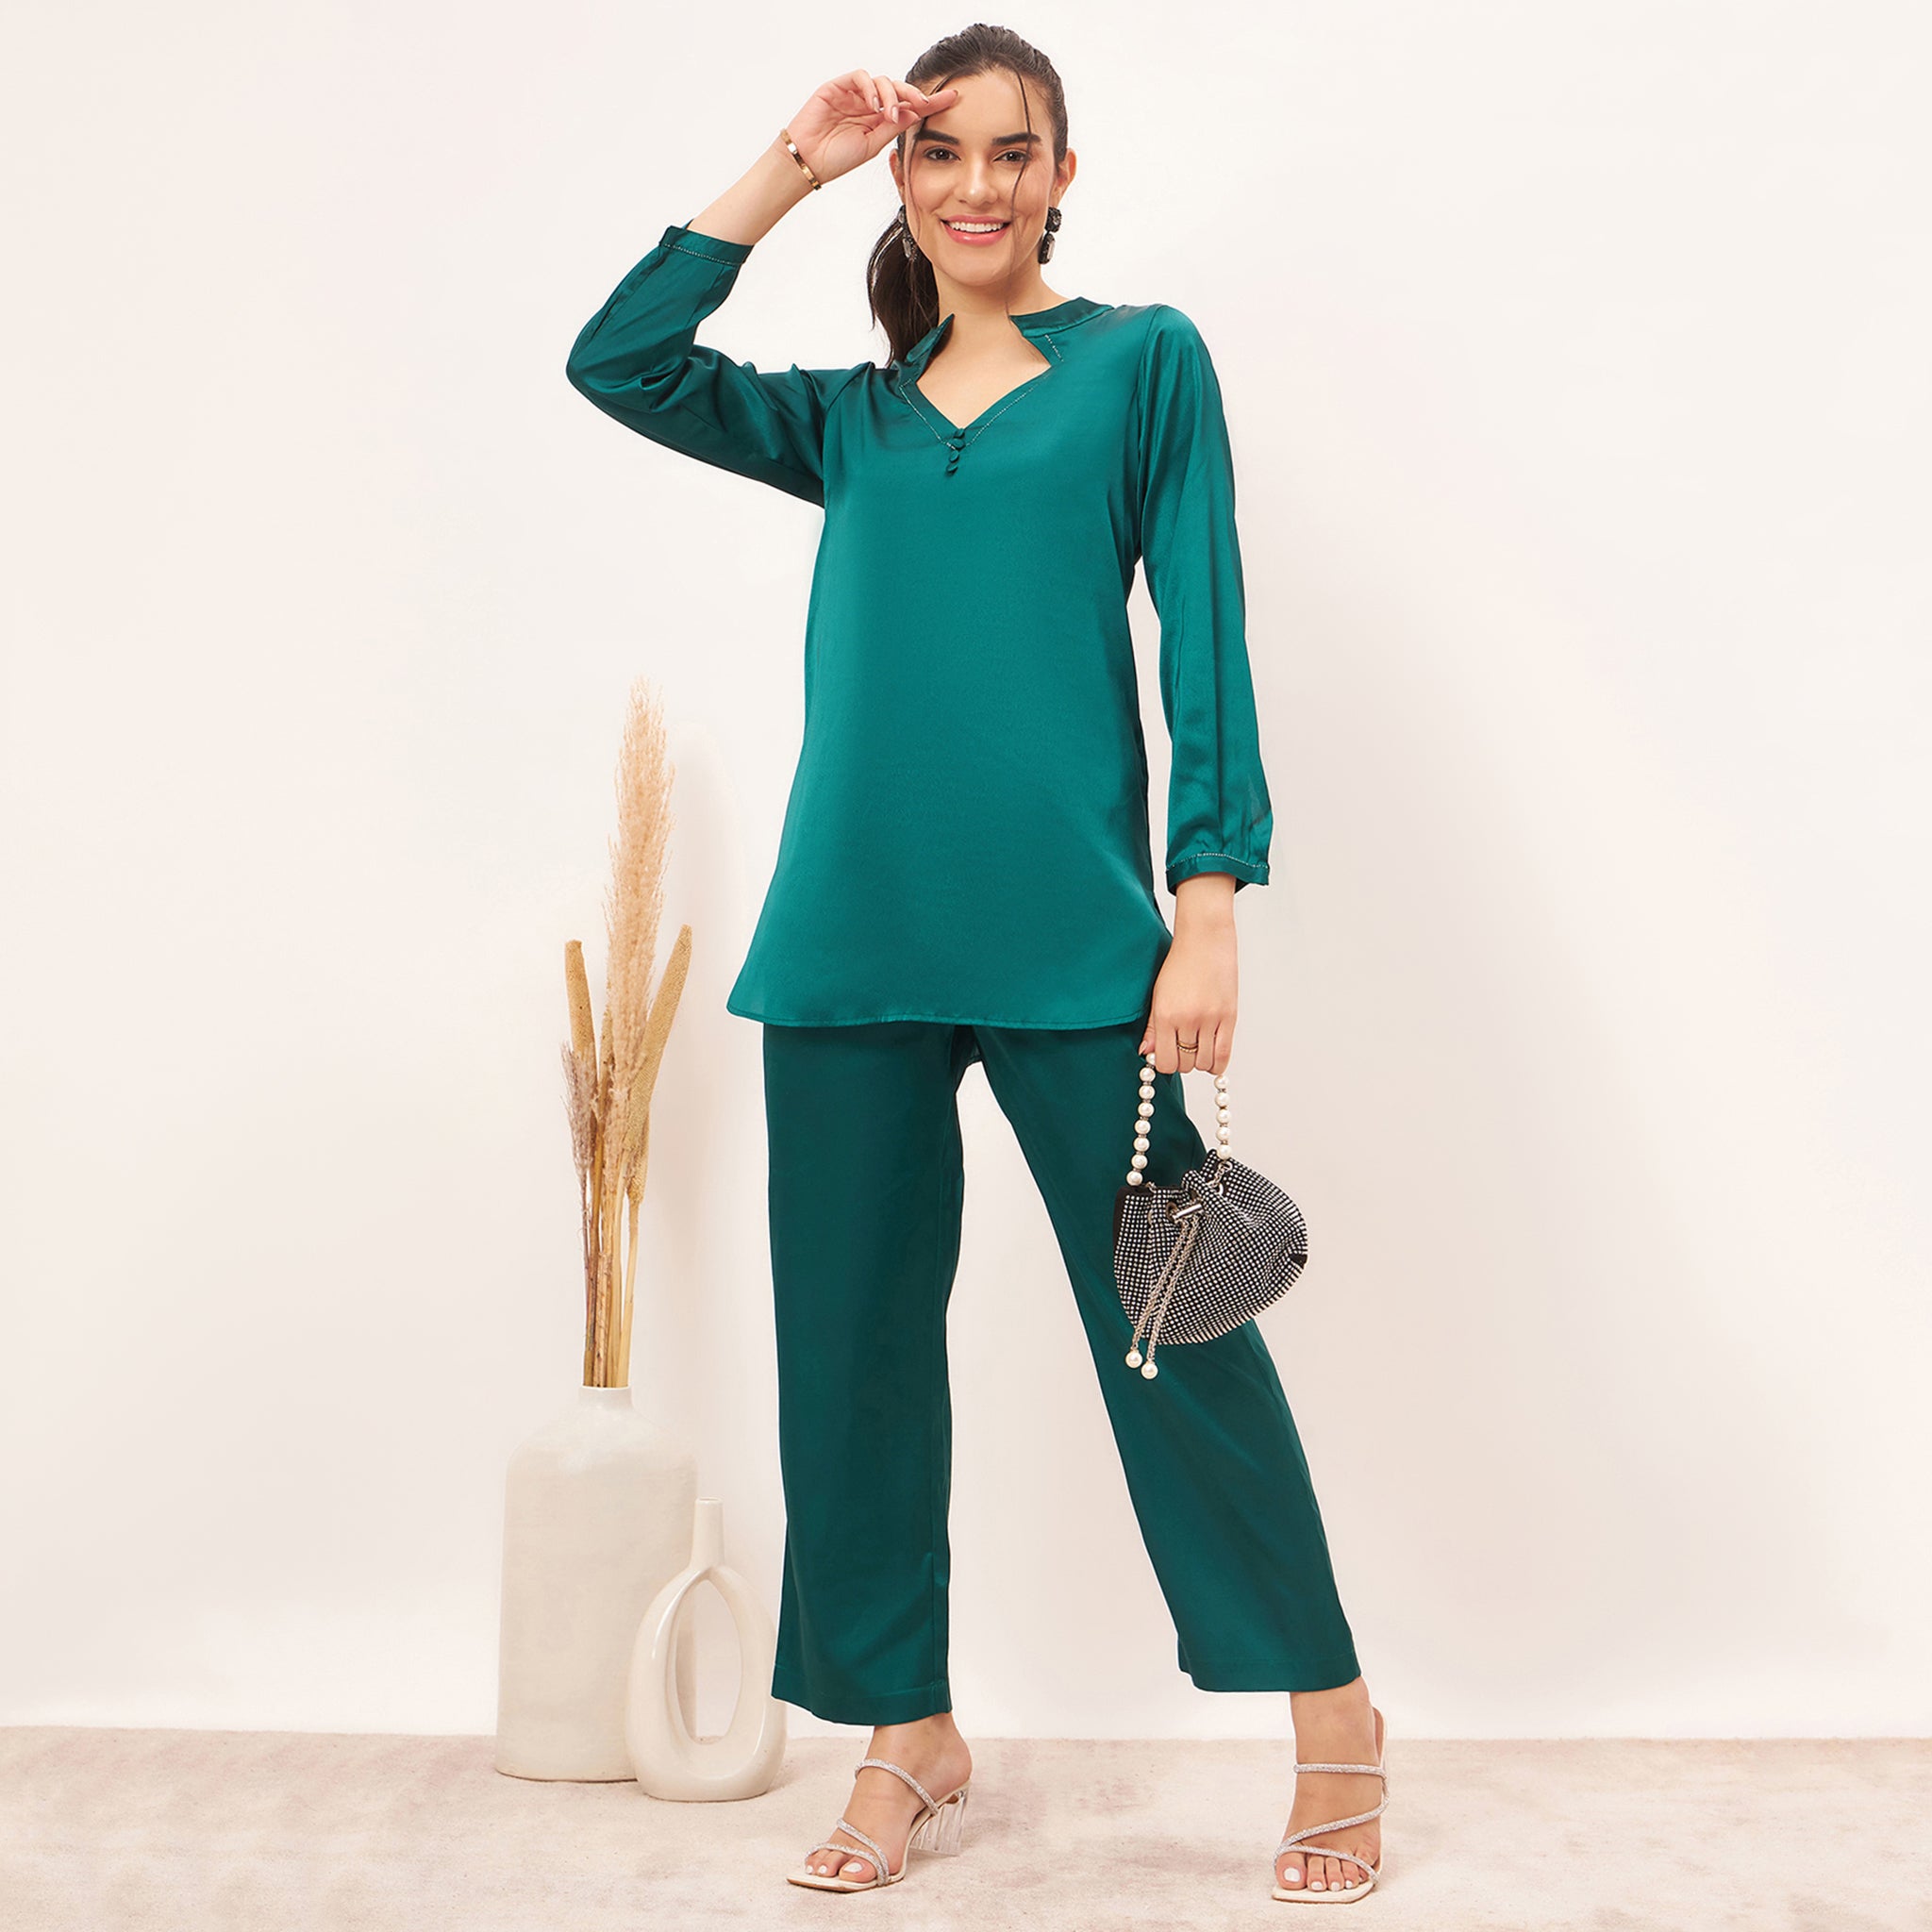 Women's Green Jeans | Explore our New Arrivals | ZARA United States